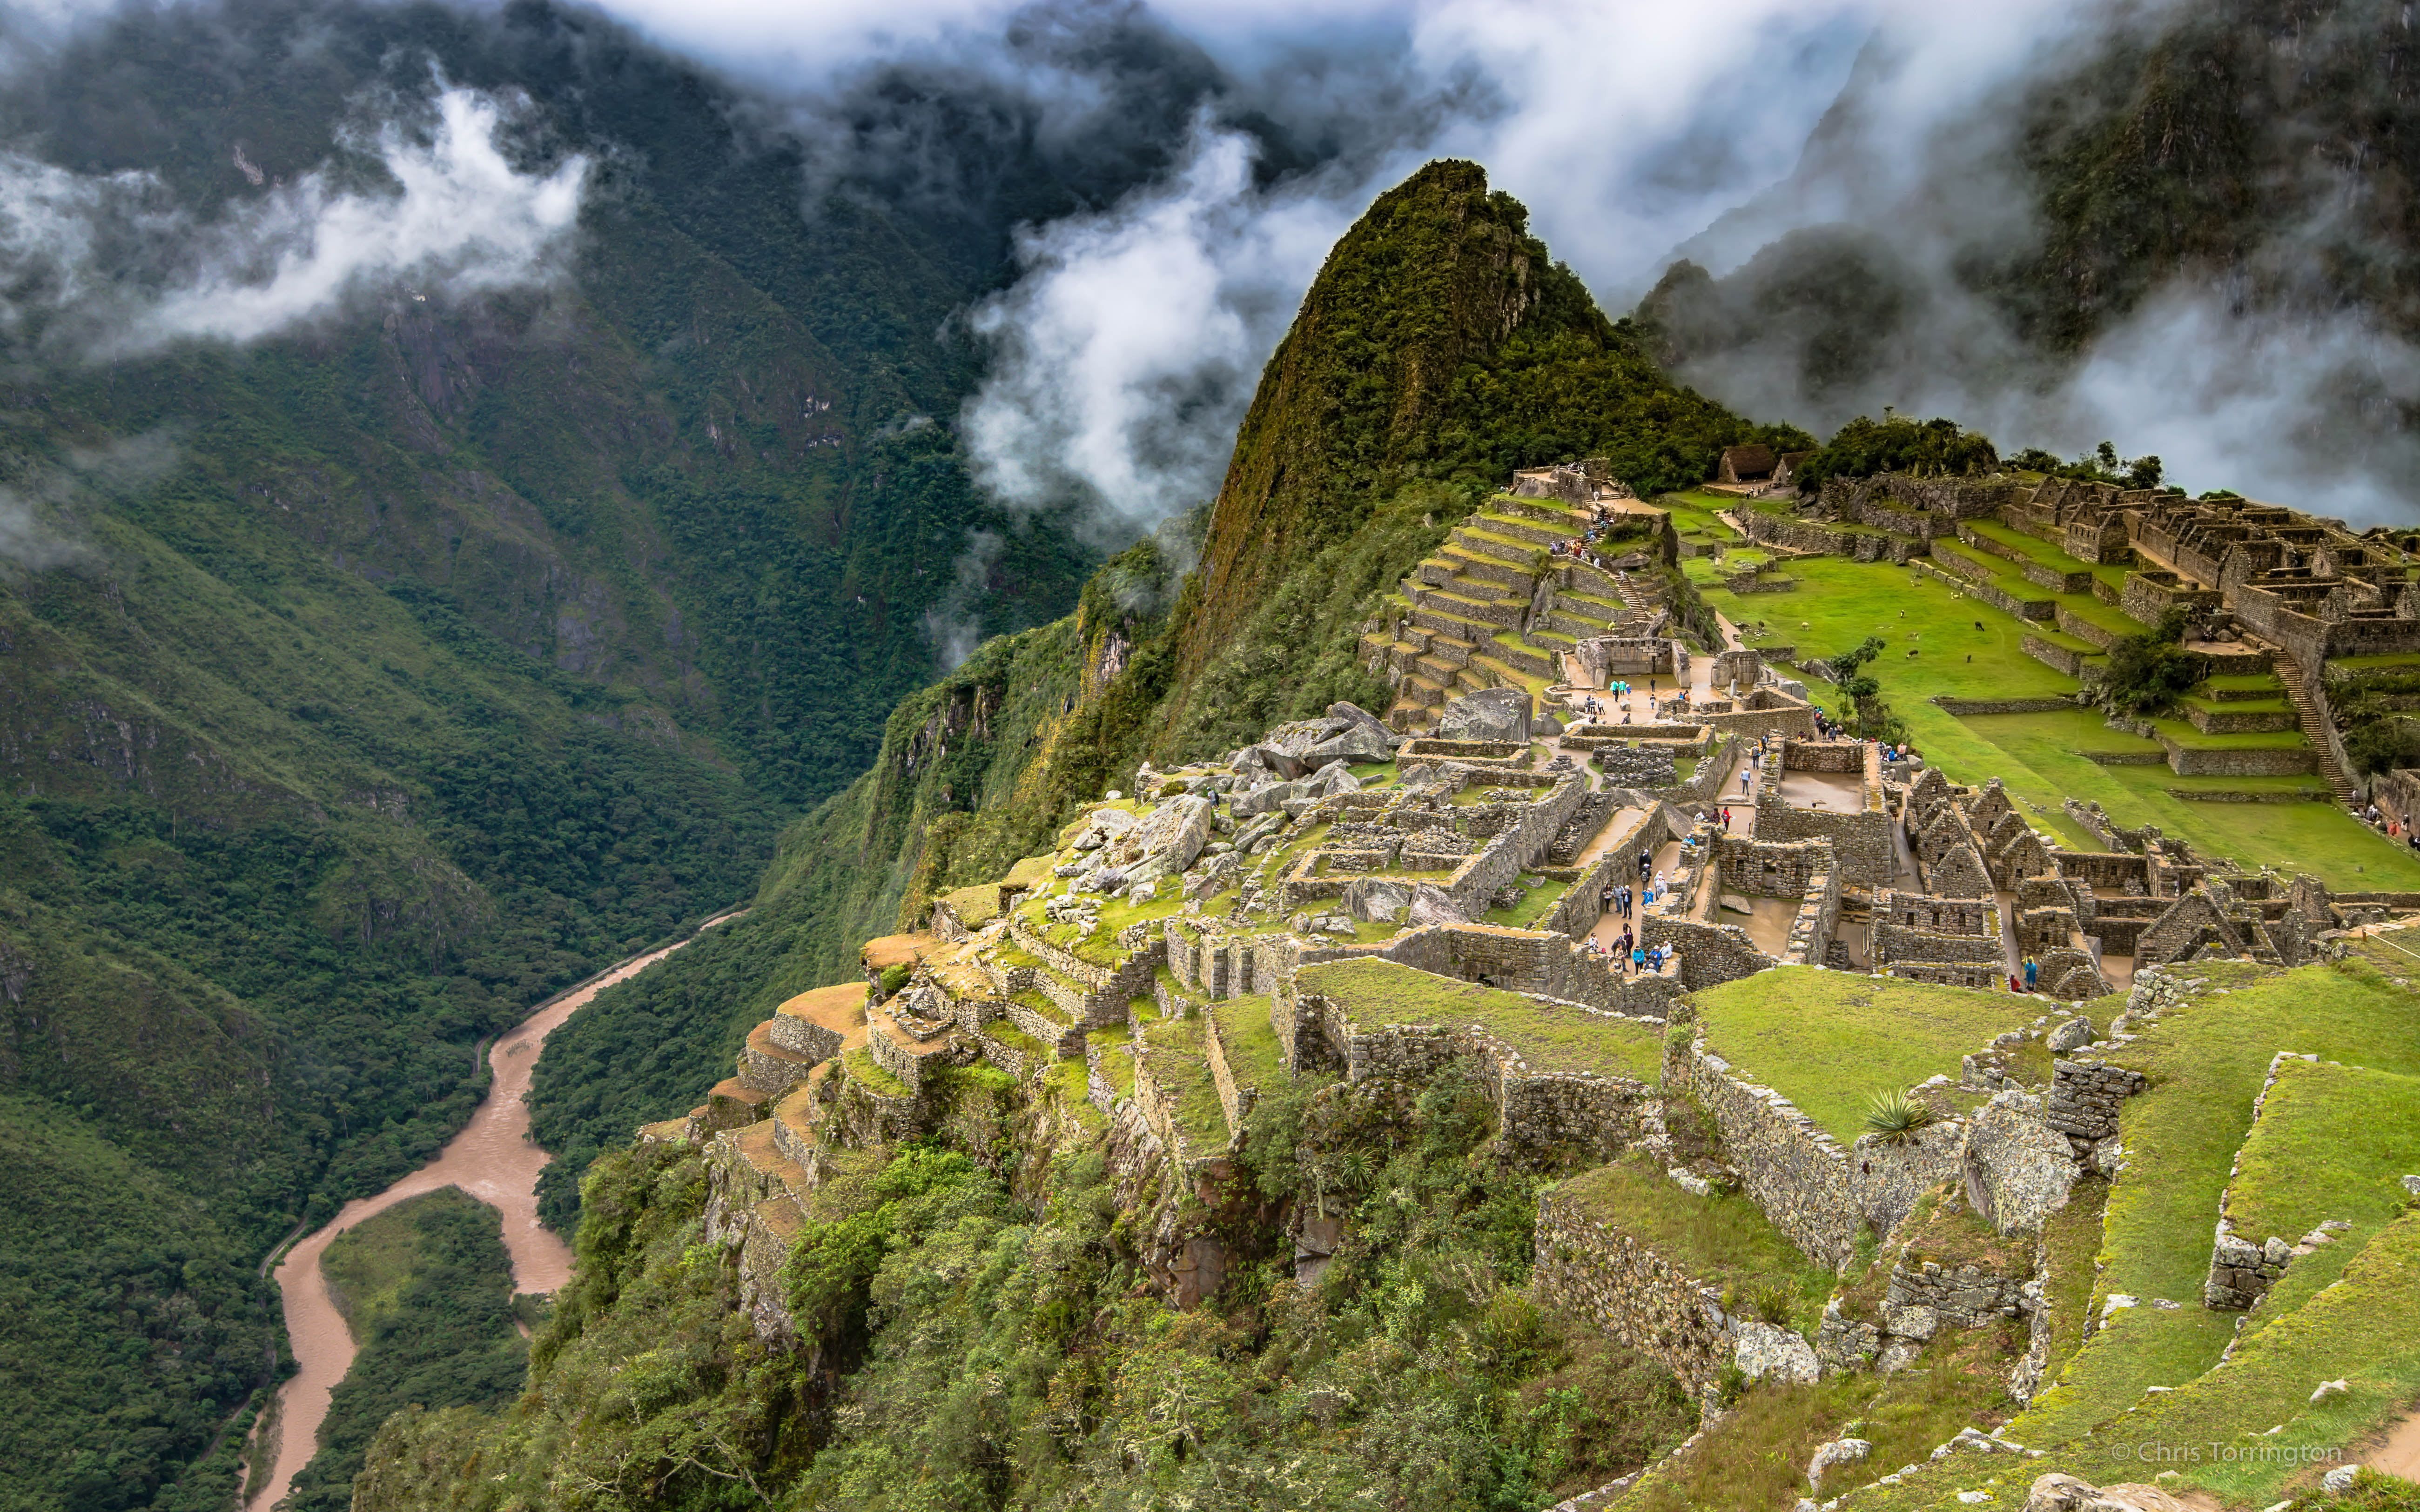 Machu Picchu Historical Place In Peru Over The River Urubamba Built In The 15th Century HD Wallp. Beautiful landscape wallpaper, Over the river, Fantasy landscape